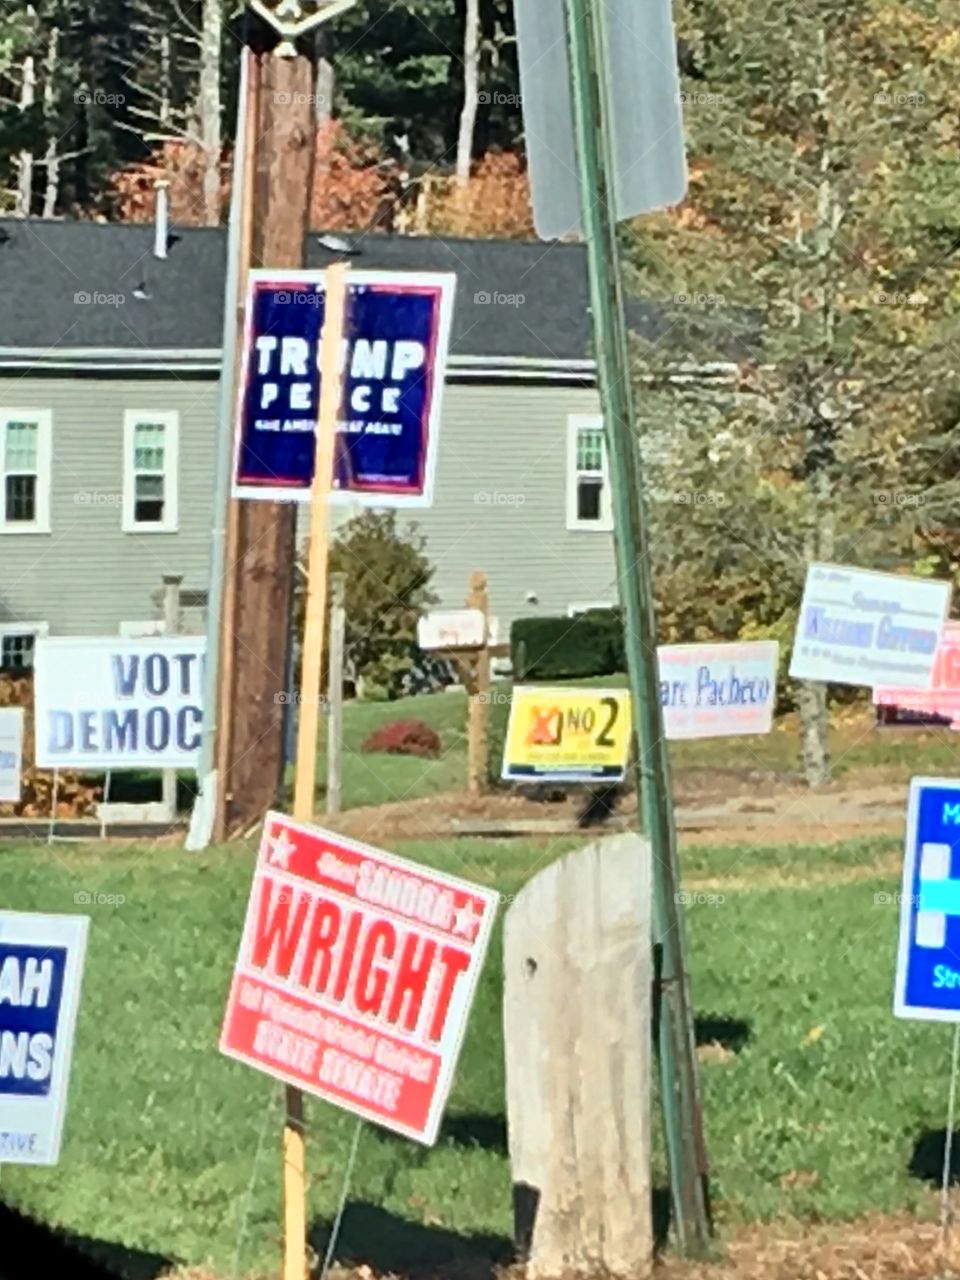 2016 USA 🇺🇸 Presidential Voting today. Freedom to Vote. Check out all the signs stuck in ground!